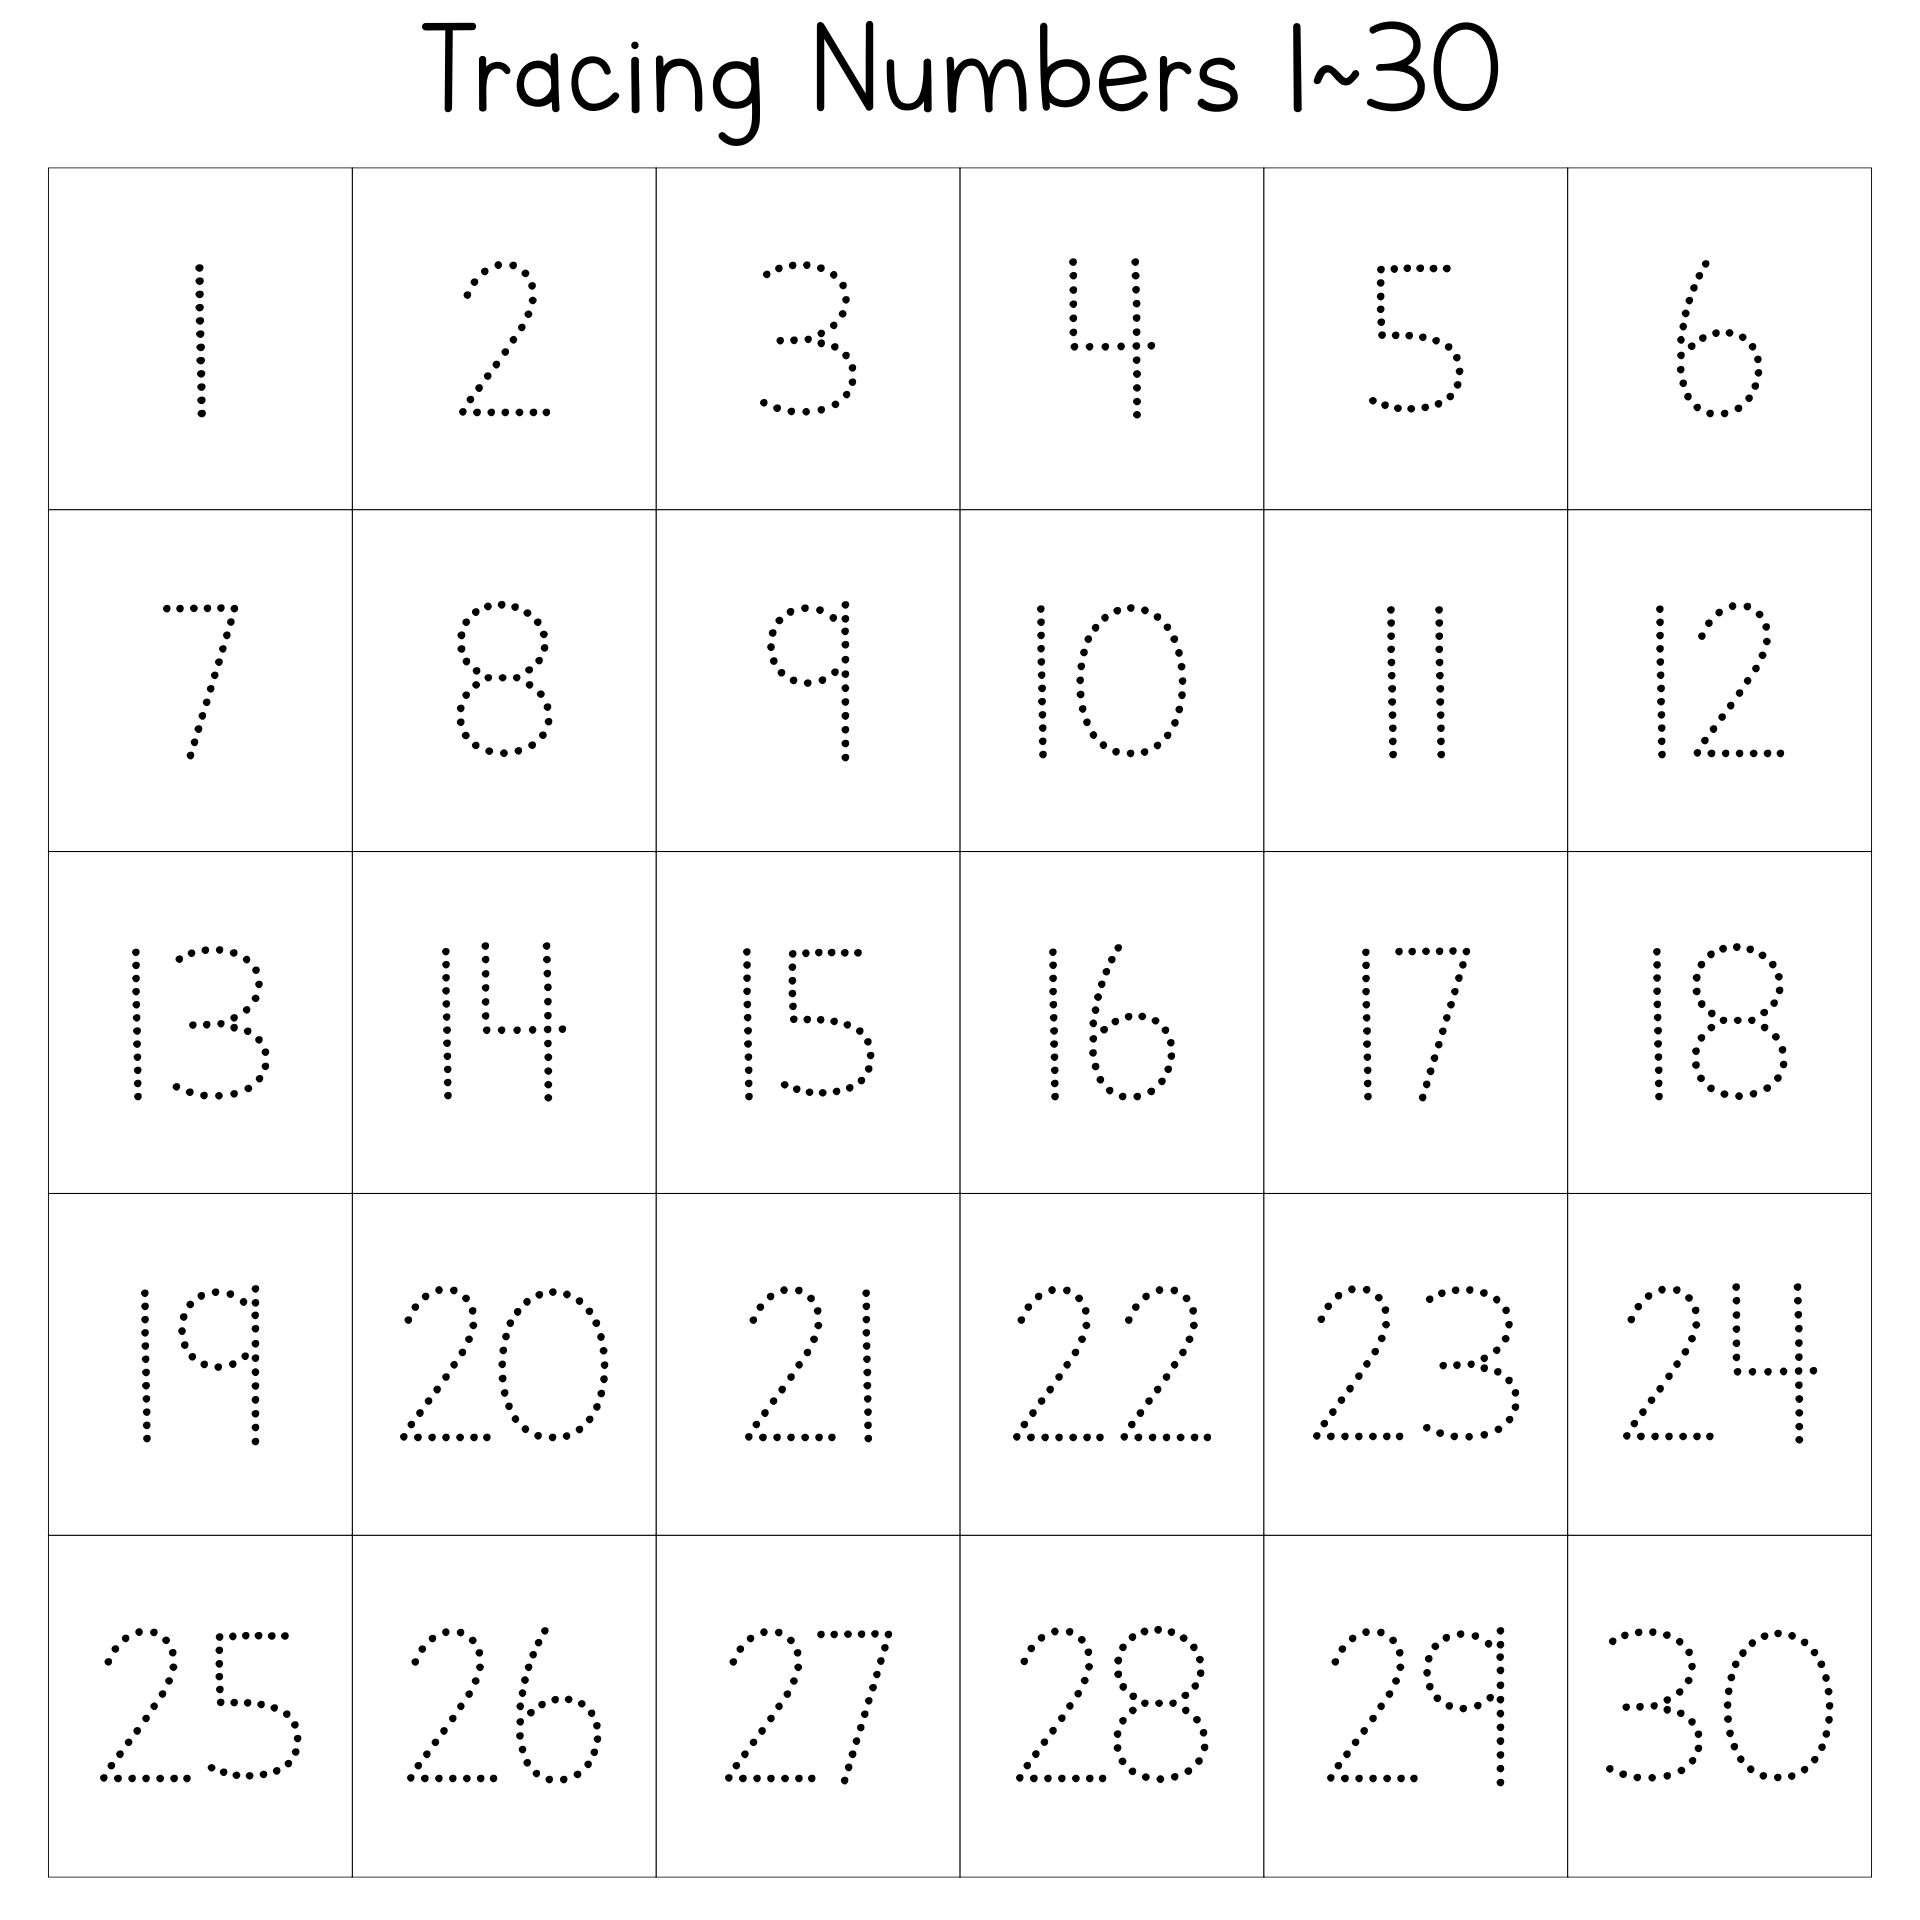 trace-numbers-1-30-worksheet